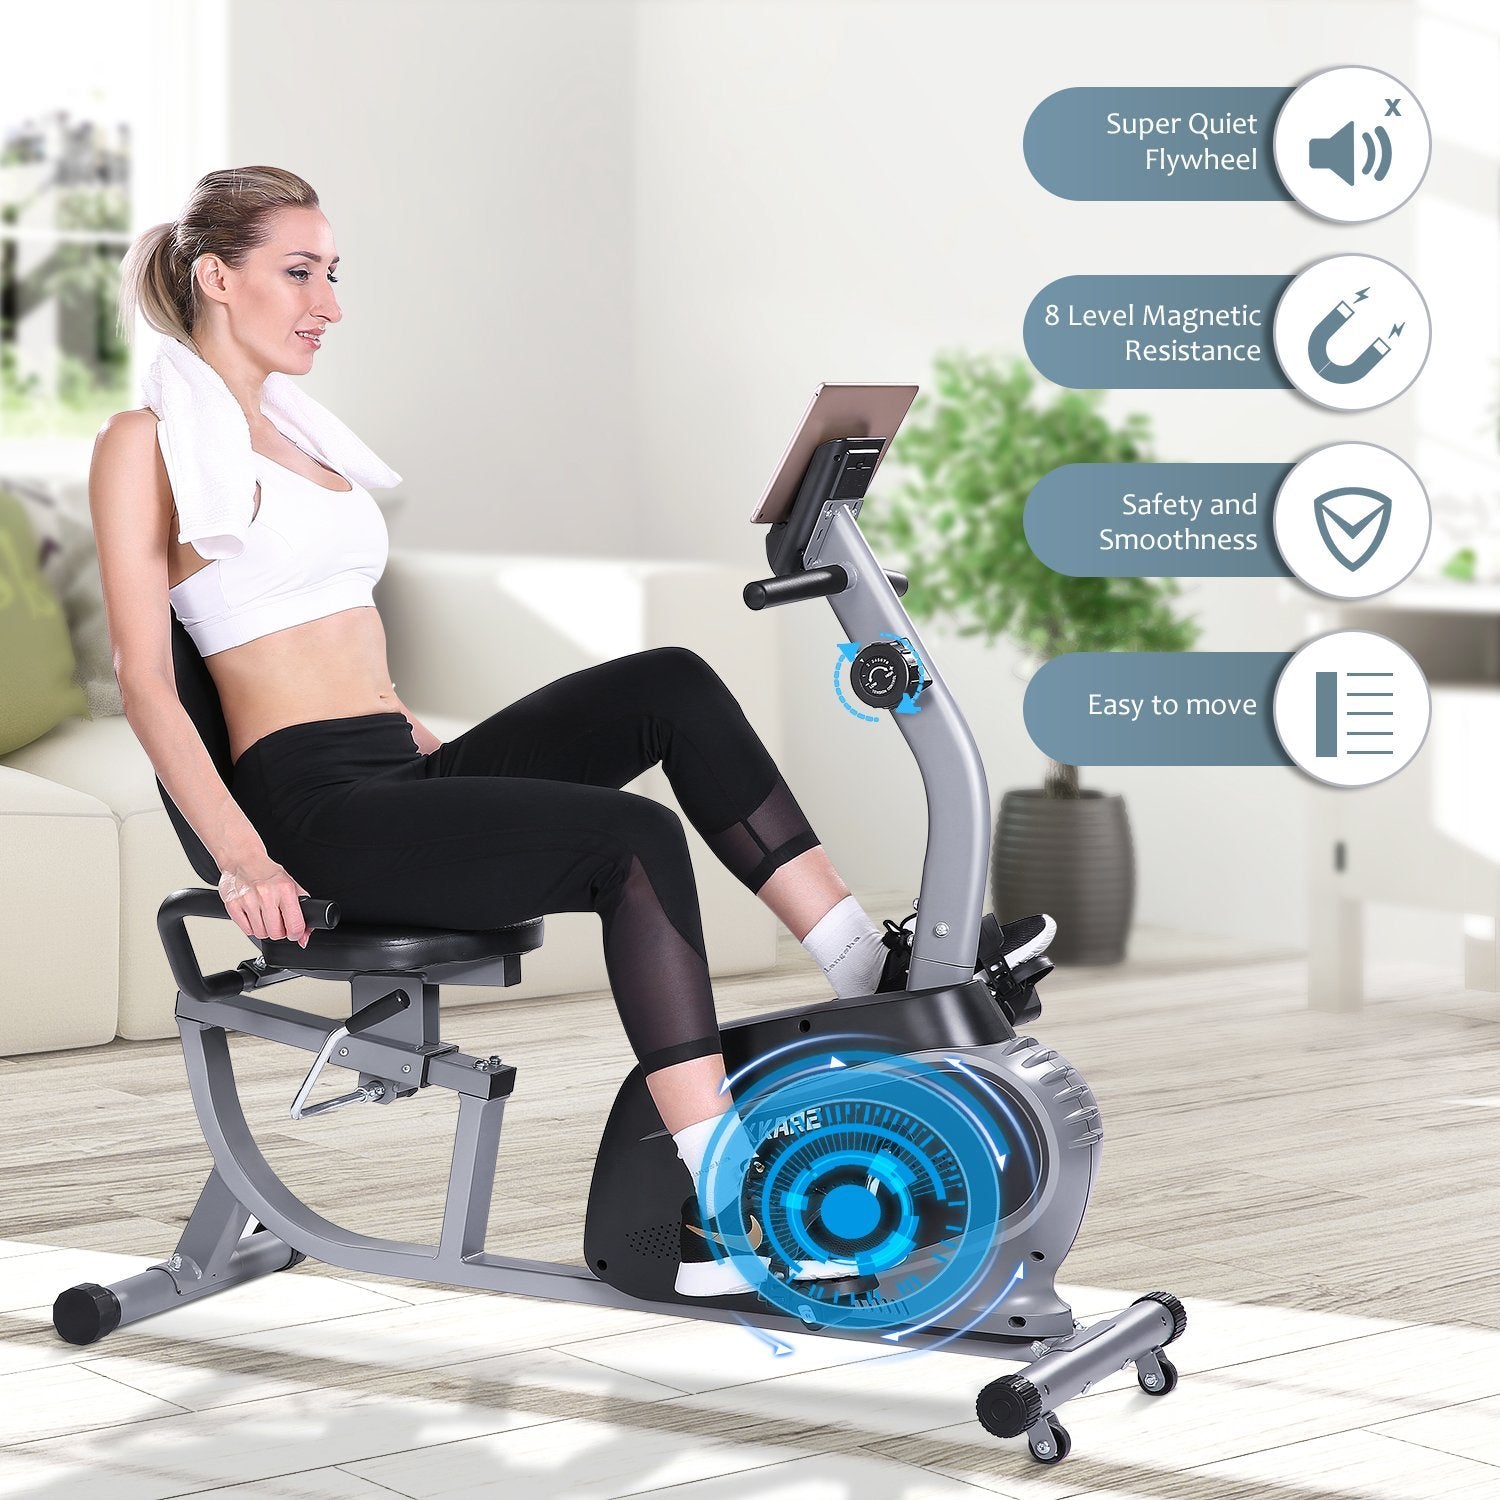 Load image into Gallery viewer, MaxKare Recumbent Exercise Bike Indoor Cycling Stationary Bike with Adjustable Seat and Resistance, Pulse Monitor/Phone Holder (Seat Height Adjustment by Lever) - NAIPO
